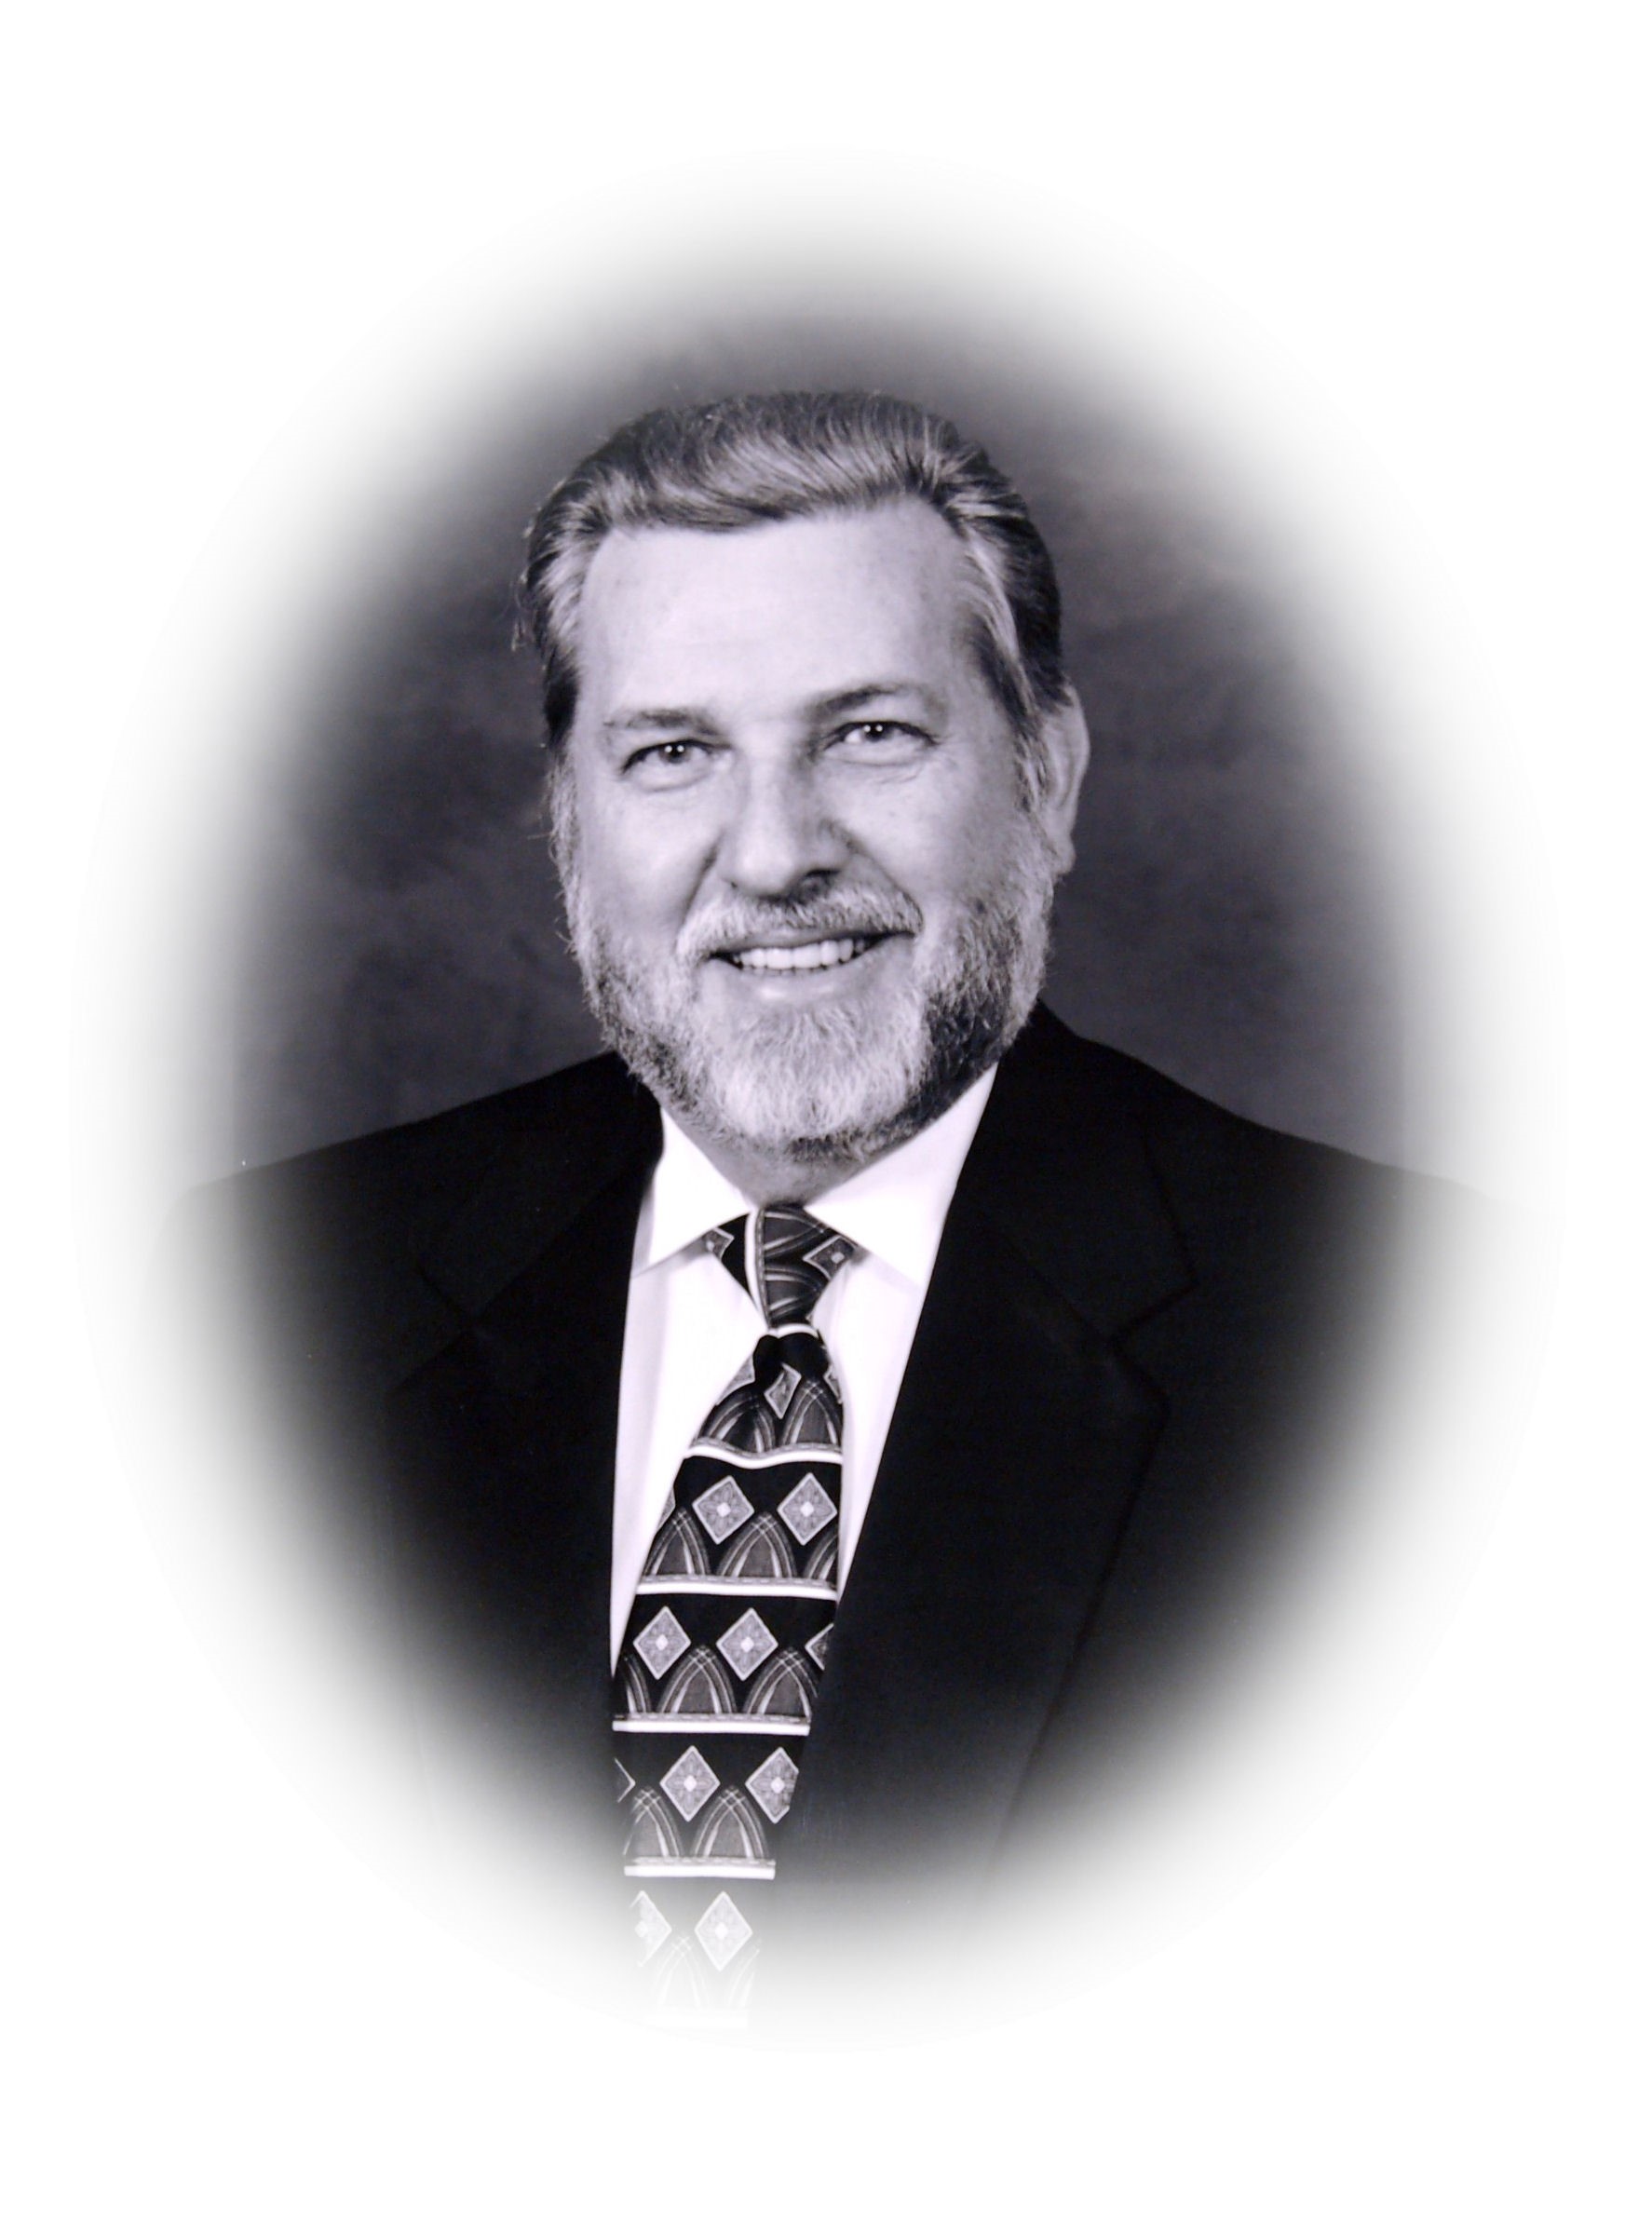 Rodger A. Simmons, PGM 2001-2002